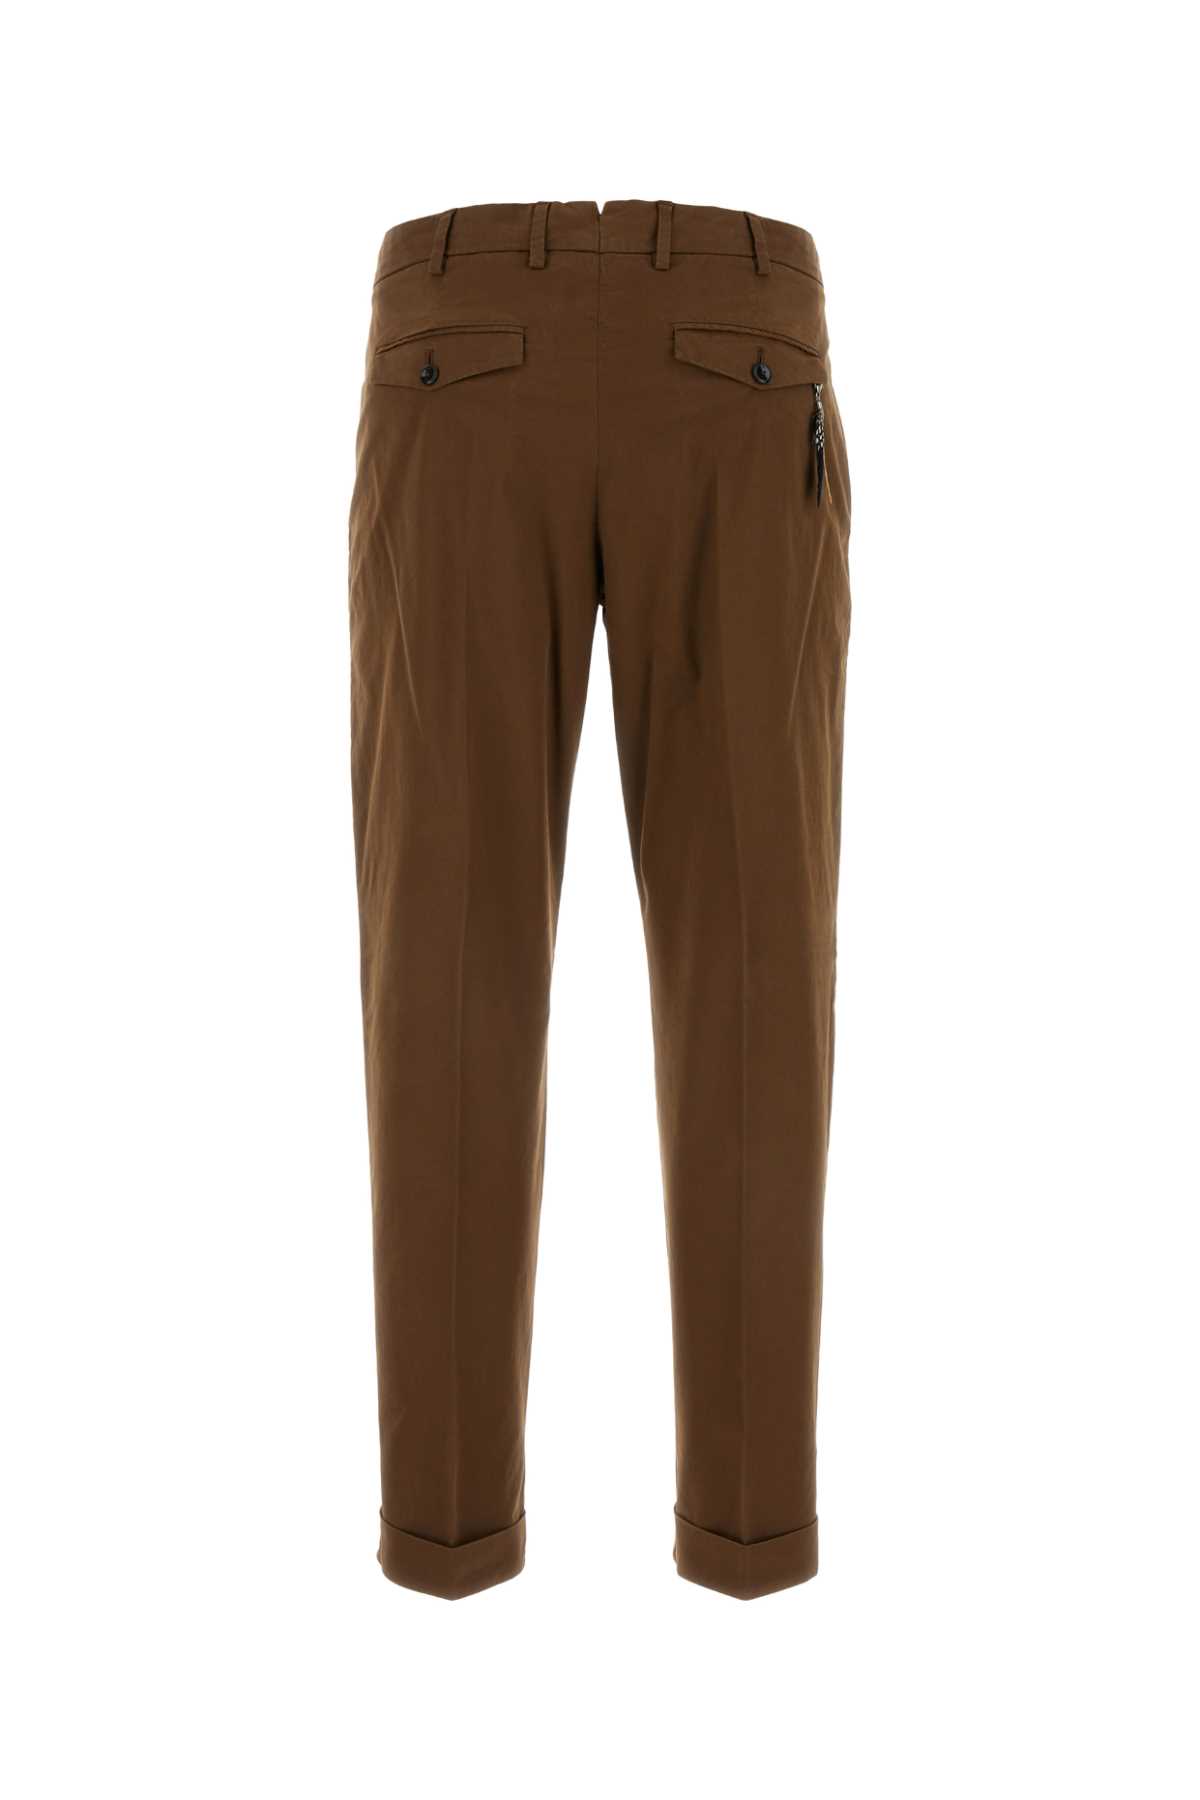 Pt01 Chocolate Stretch Cotton Pant In Testamoro